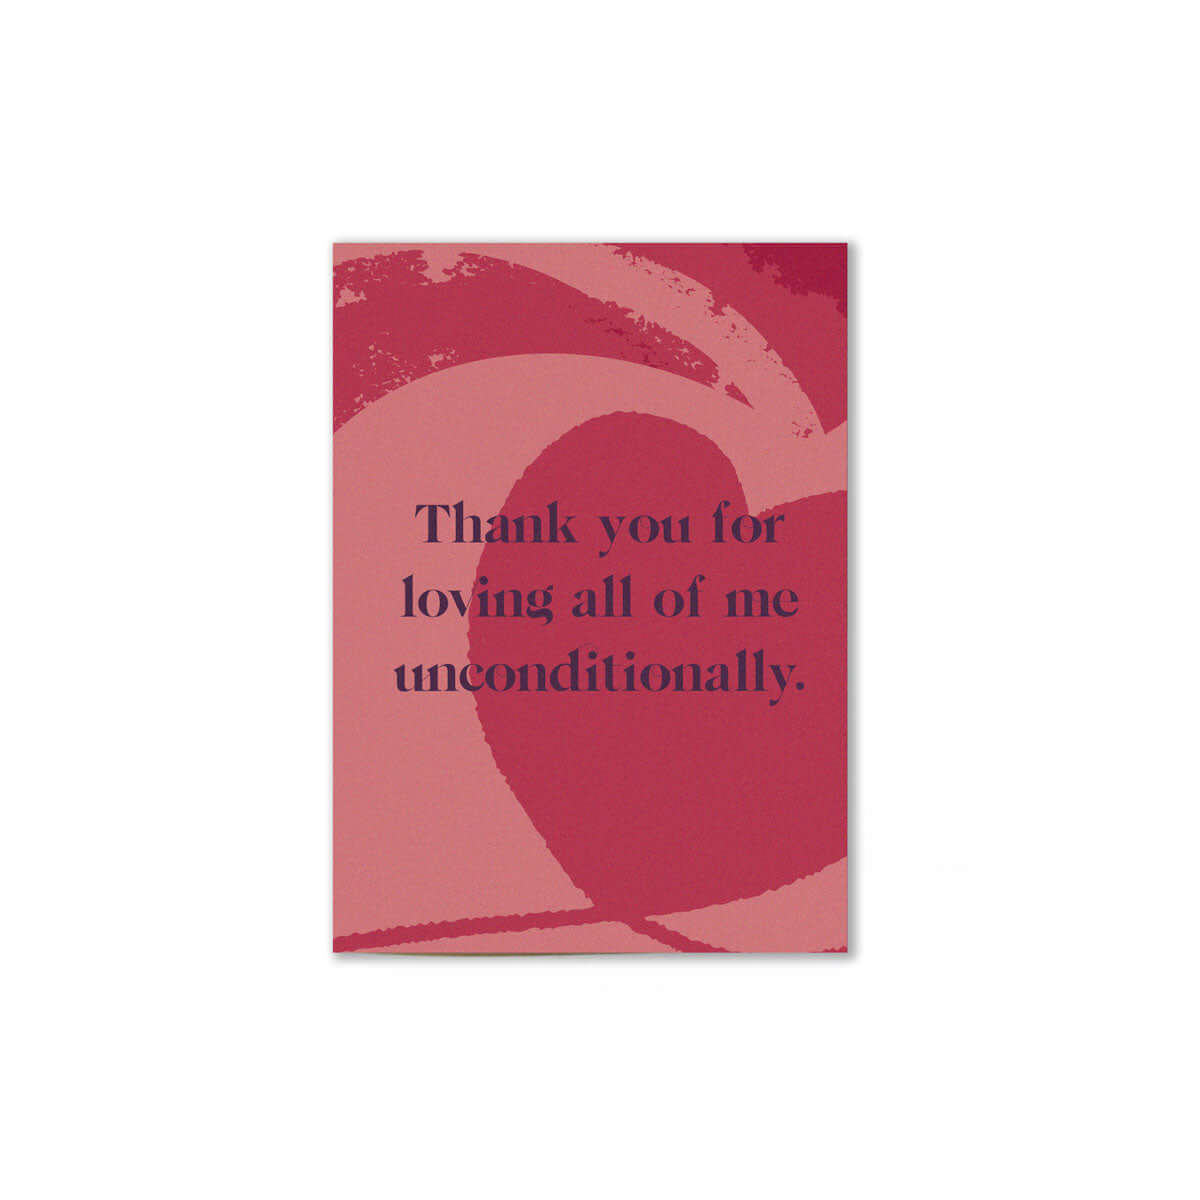 pink themed unconditional love card that reads "Thank you for loving all of me unconditionally" with a hear illustration on cover.